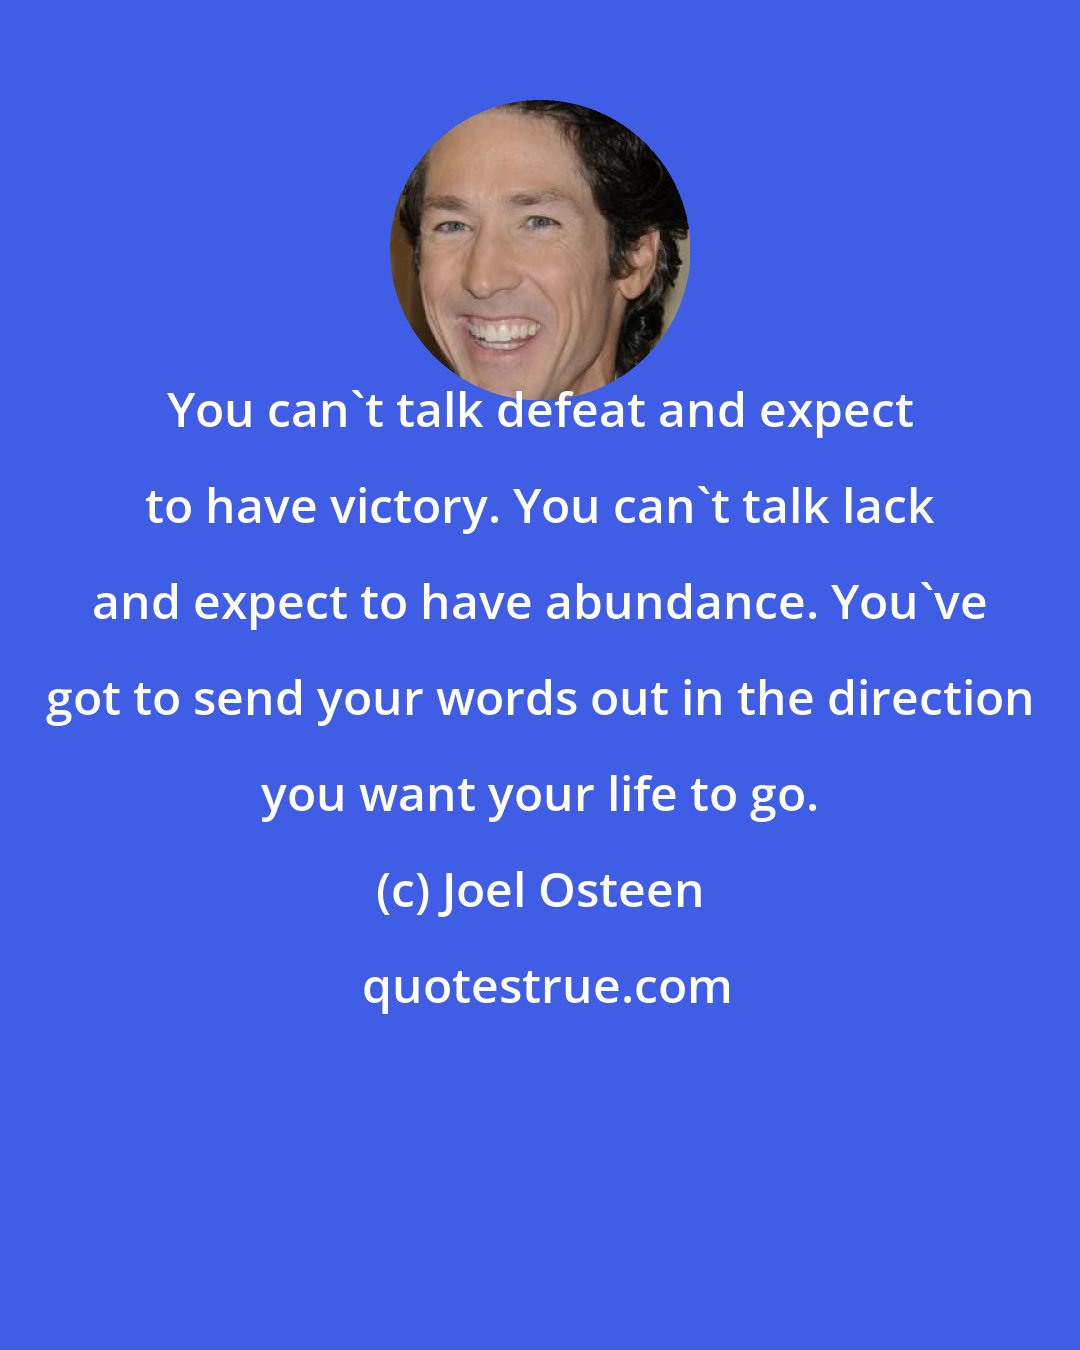 Joel Osteen: You can't talk defeat and expect to have victory. You can't talk lack and expect to have abundance. You've got to send your words out in the direction you want your life to go.